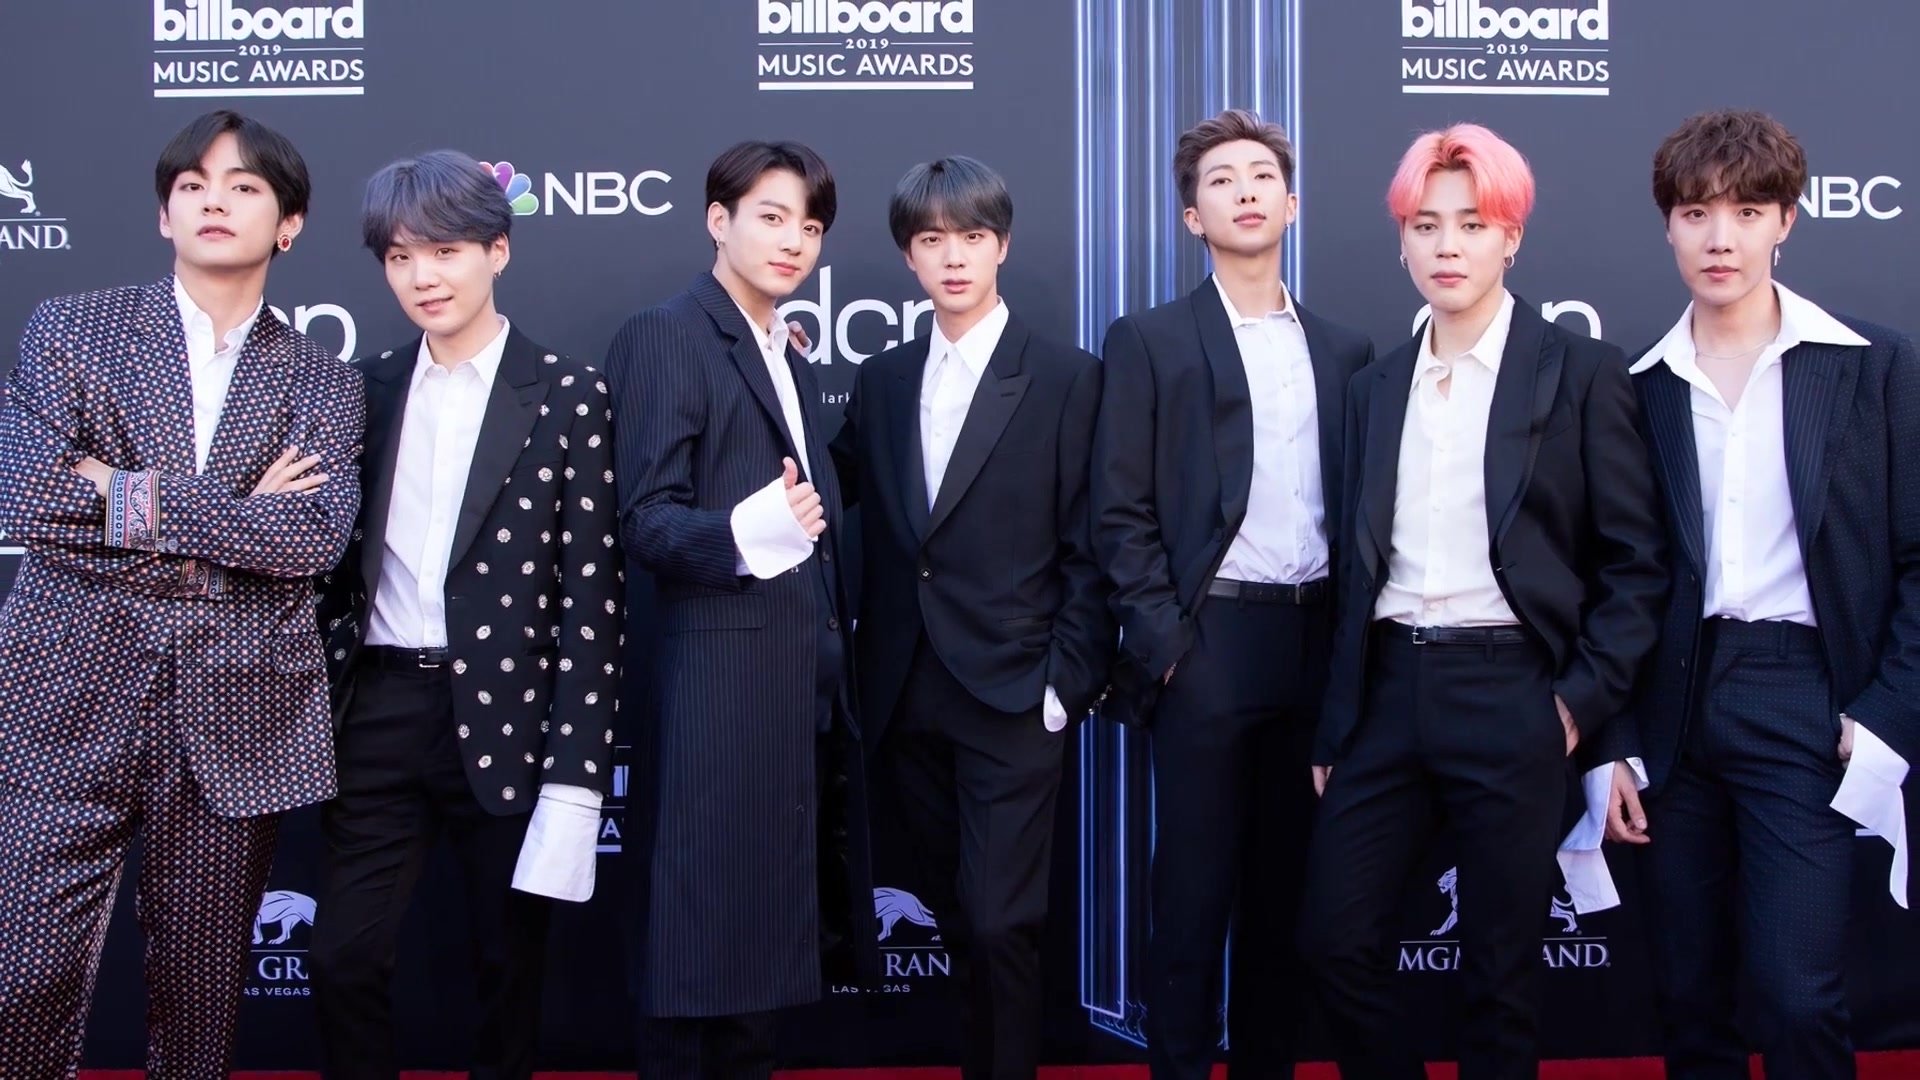 BTS on the Billboard Music Awards red carpet 1 May 2019